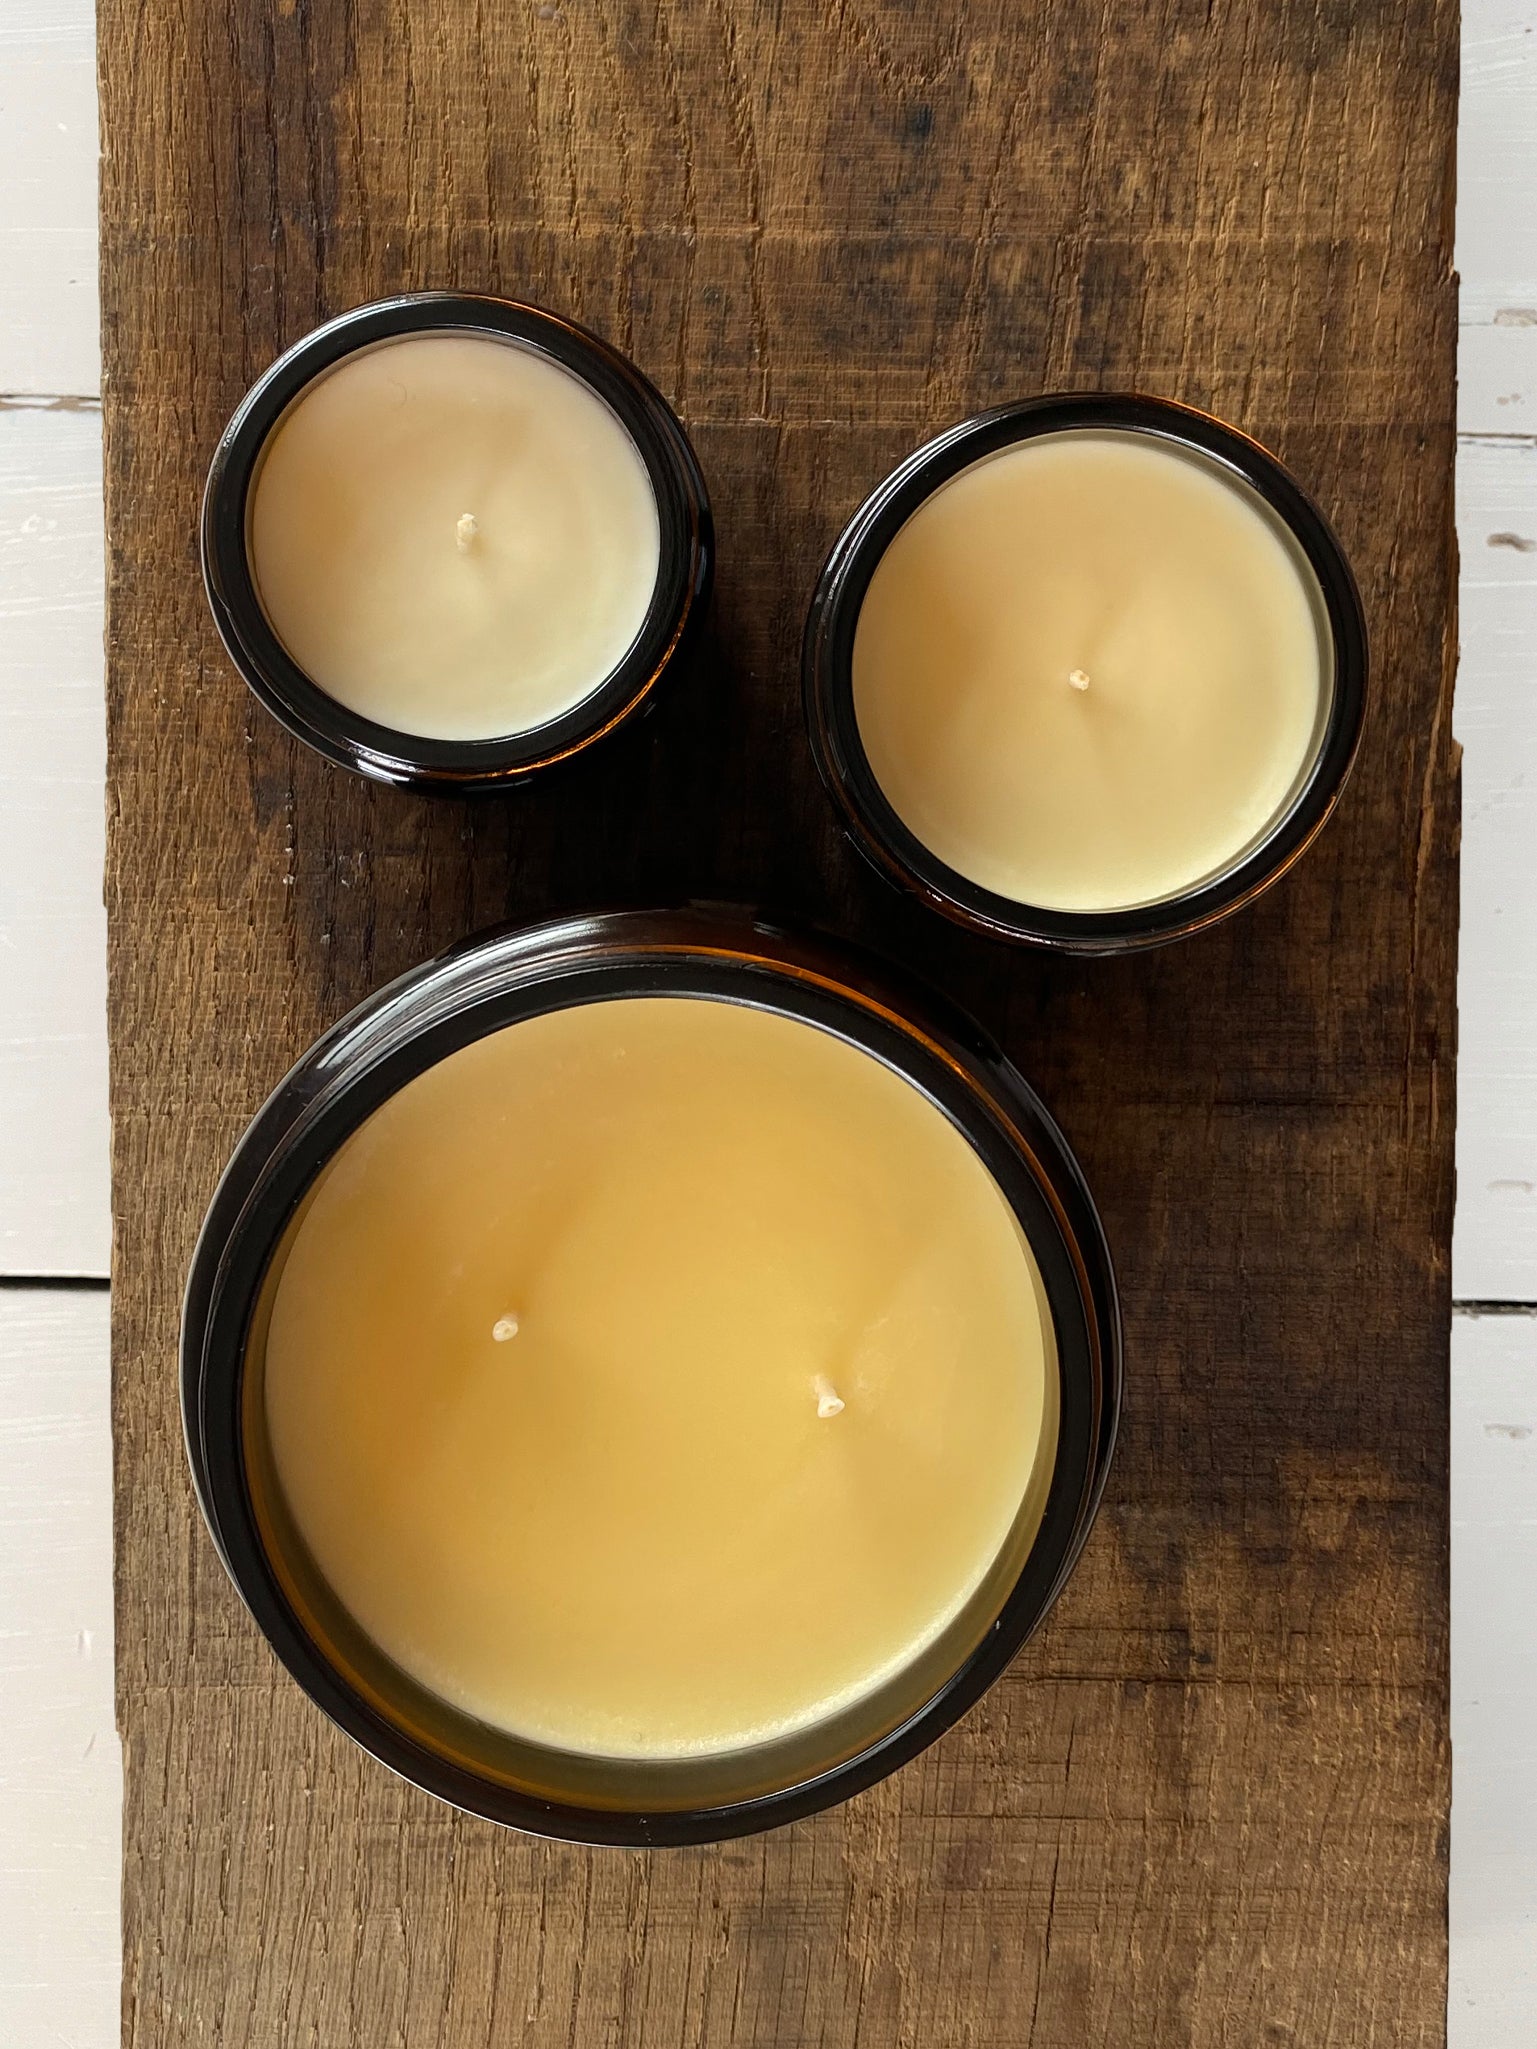 Bouclé London all natural soy wax candles made in the UK